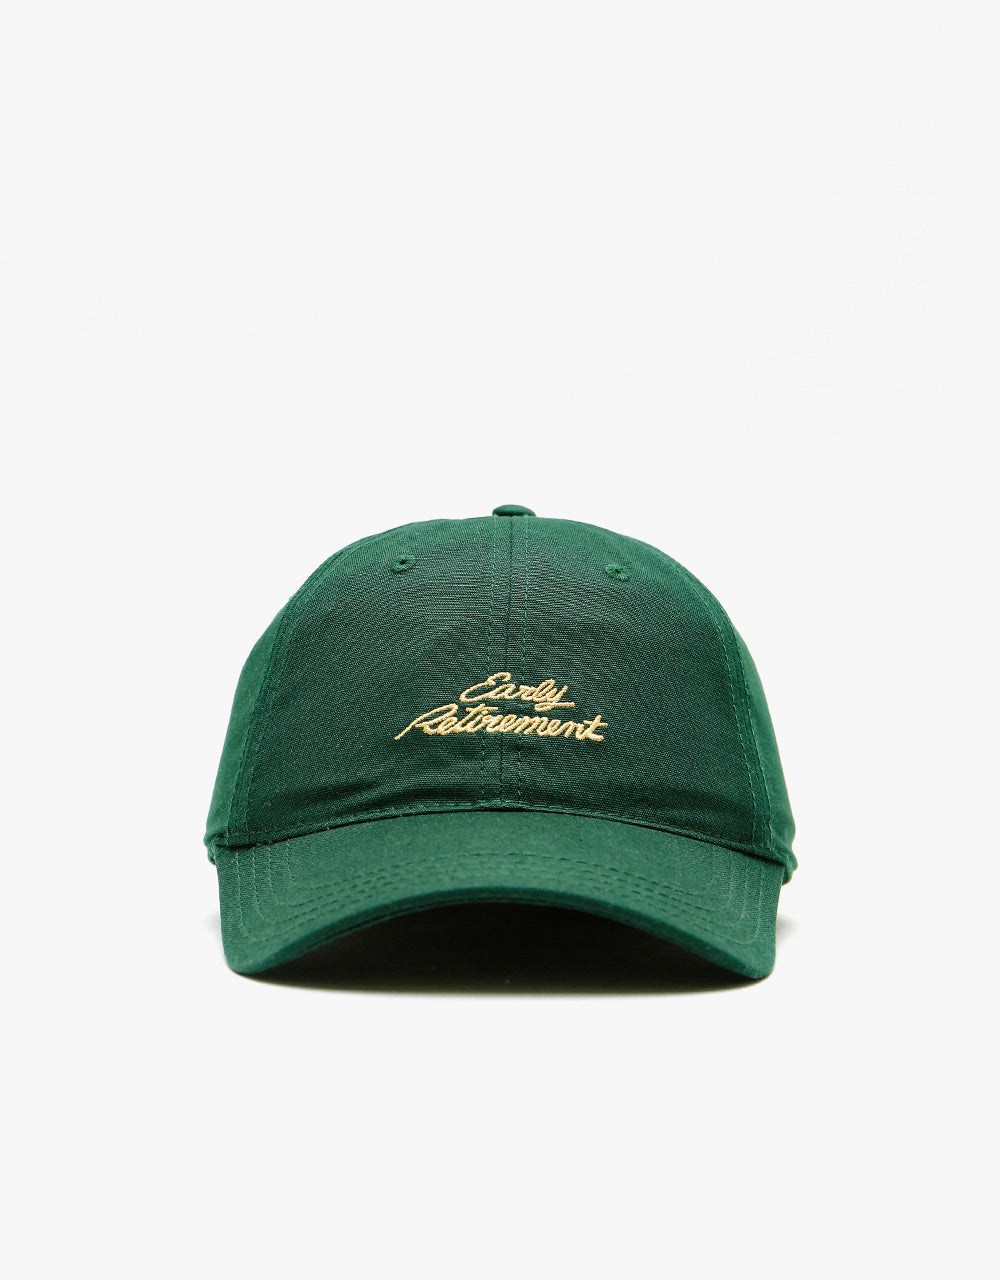 The Dudes Early Retirement 6 Panel Snapback Cap - Duck